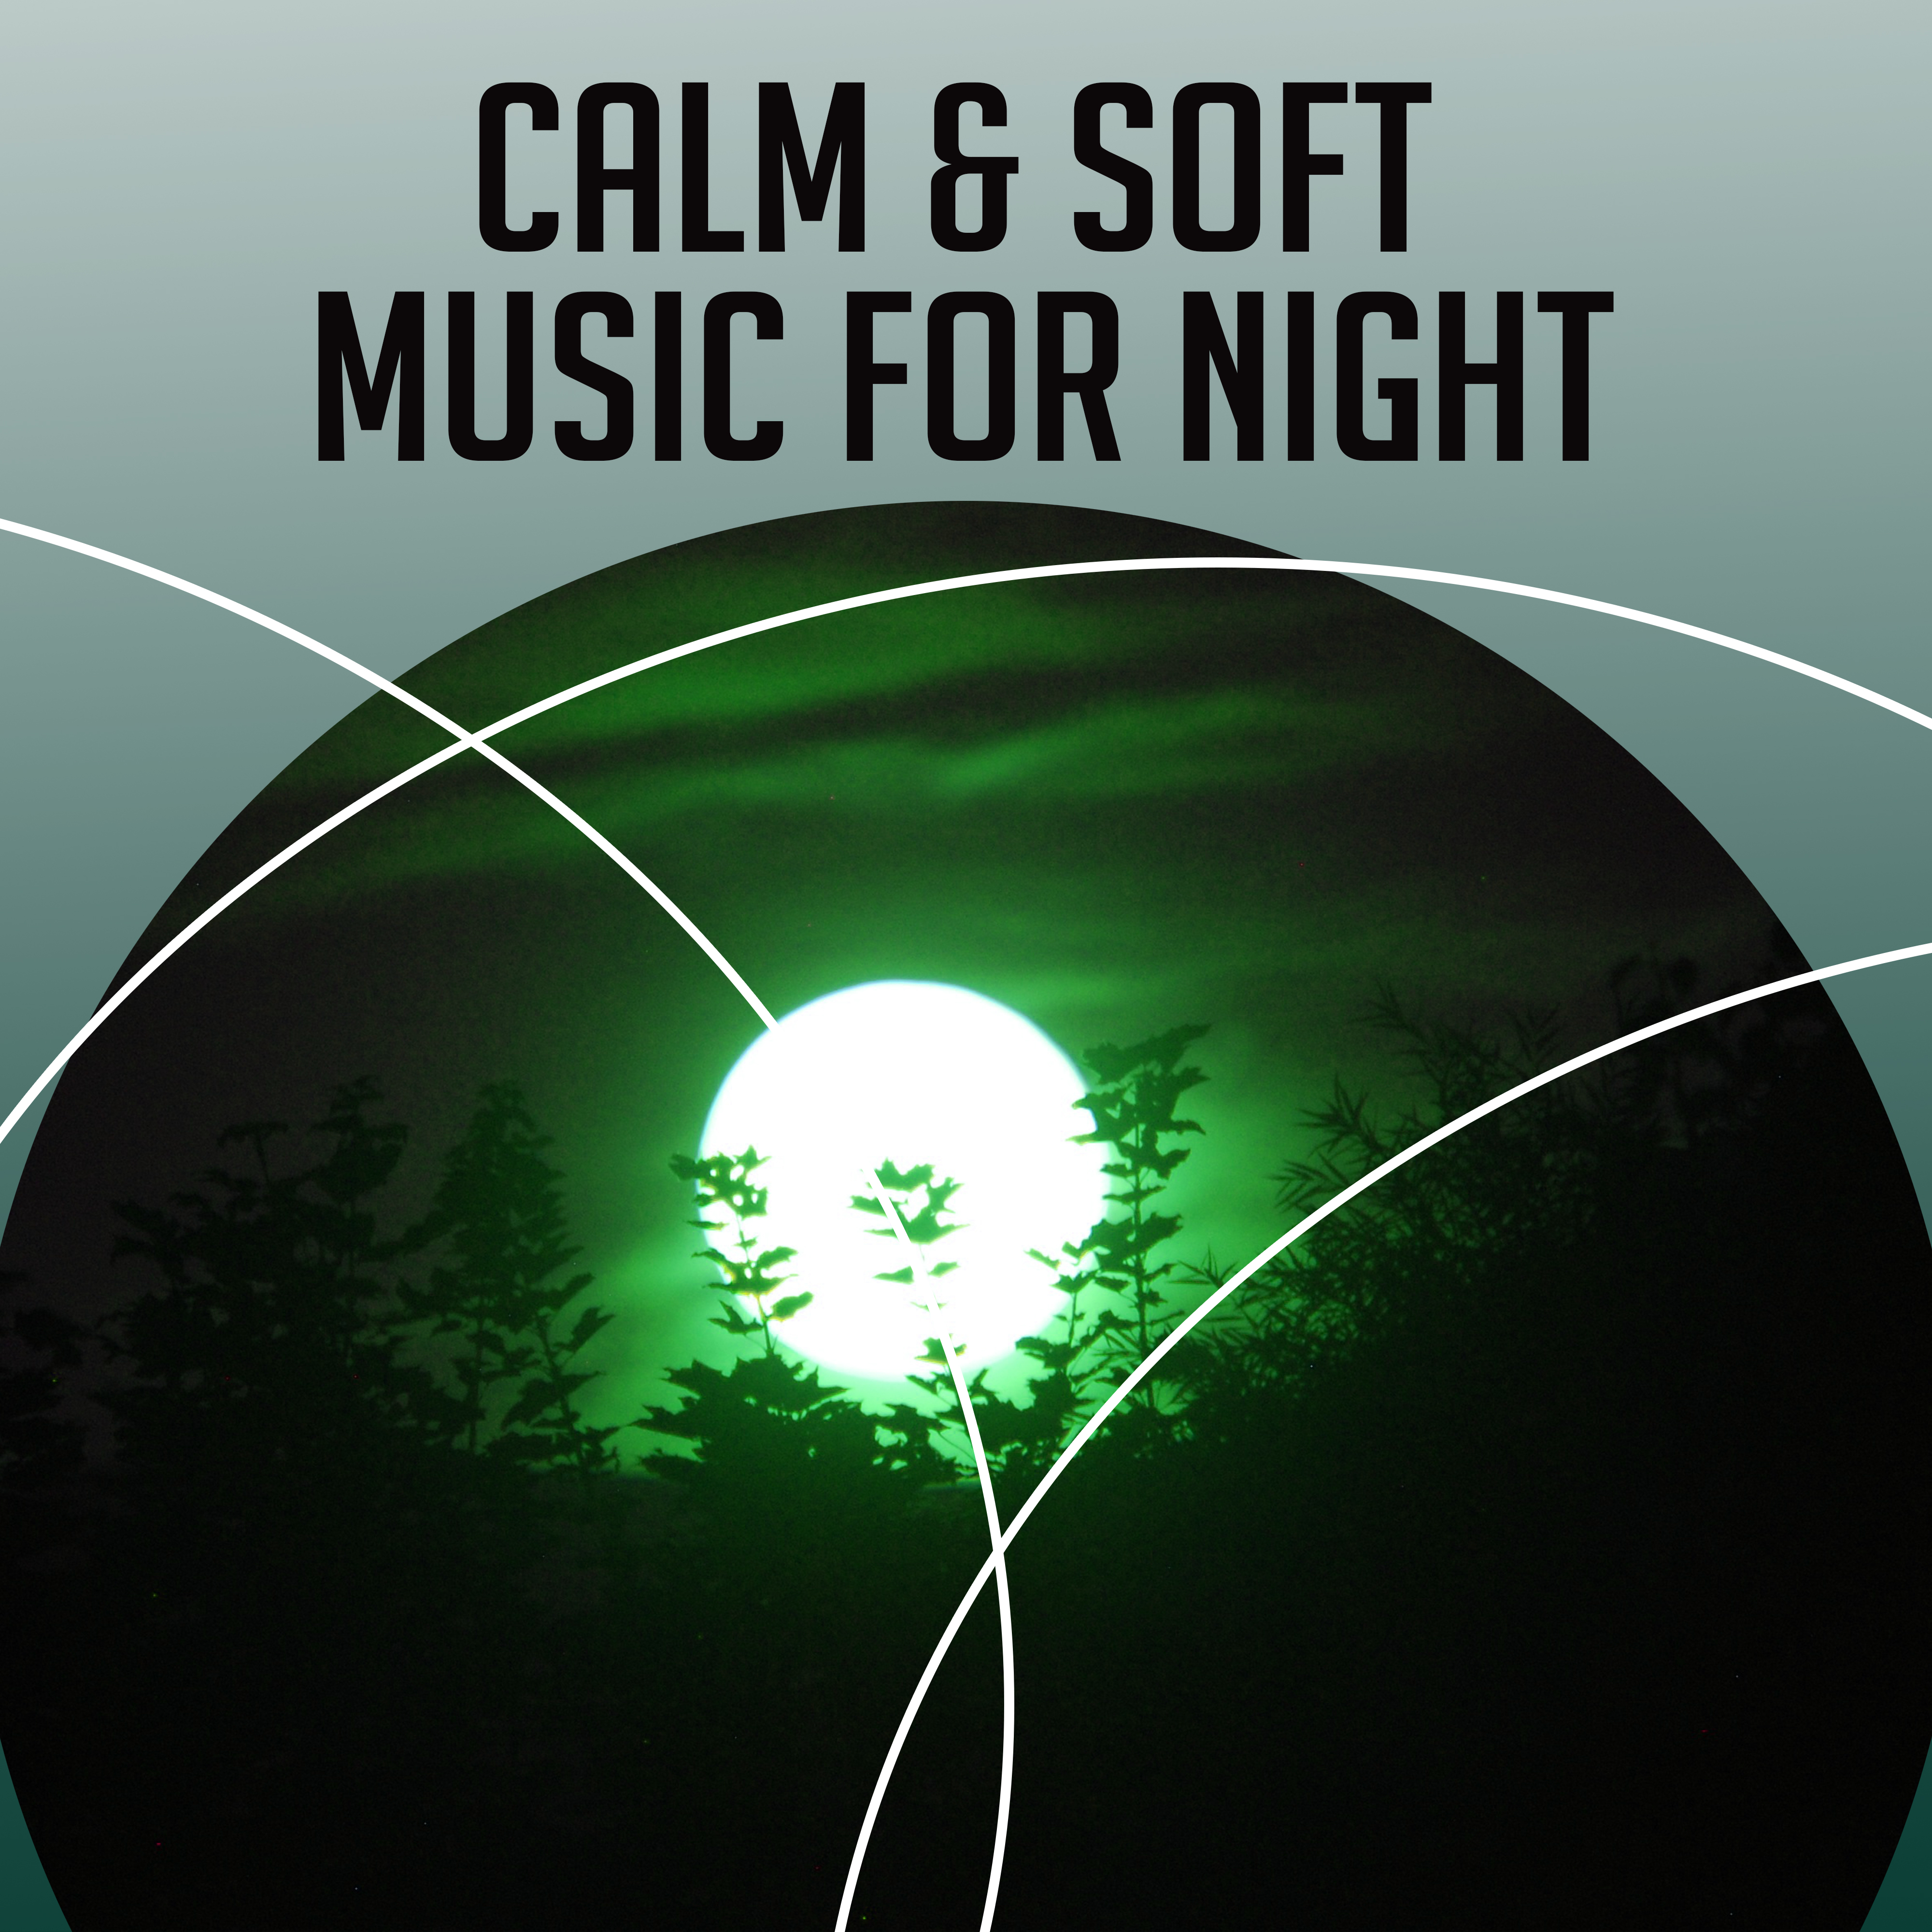 Calm  Soft Music for Night  Self Relaxation, Rest All Night, Soothing Melodies, Sleep Well